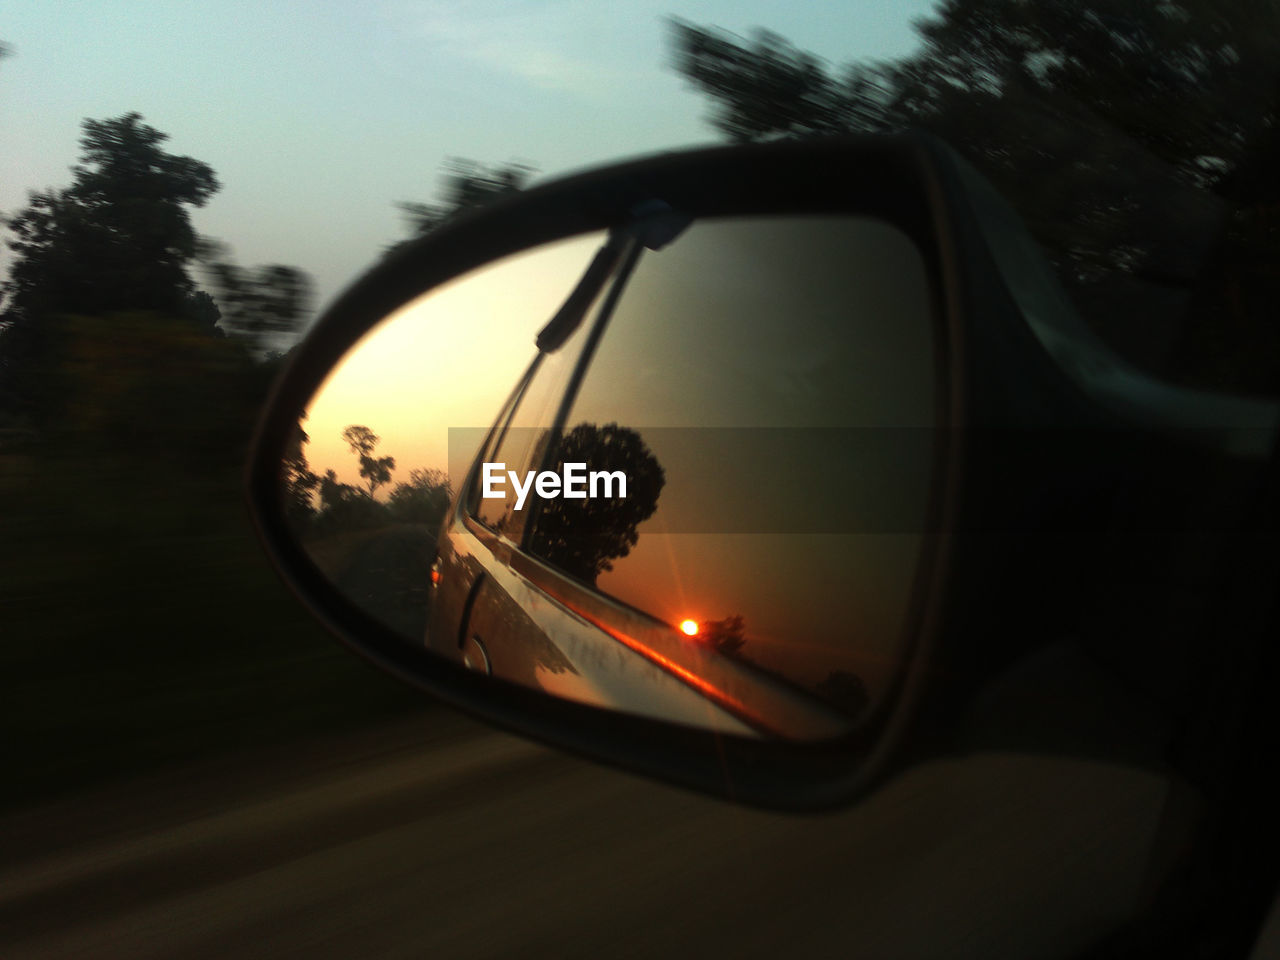 CLOSE-UP OF SIDE-VIEW MIRROR